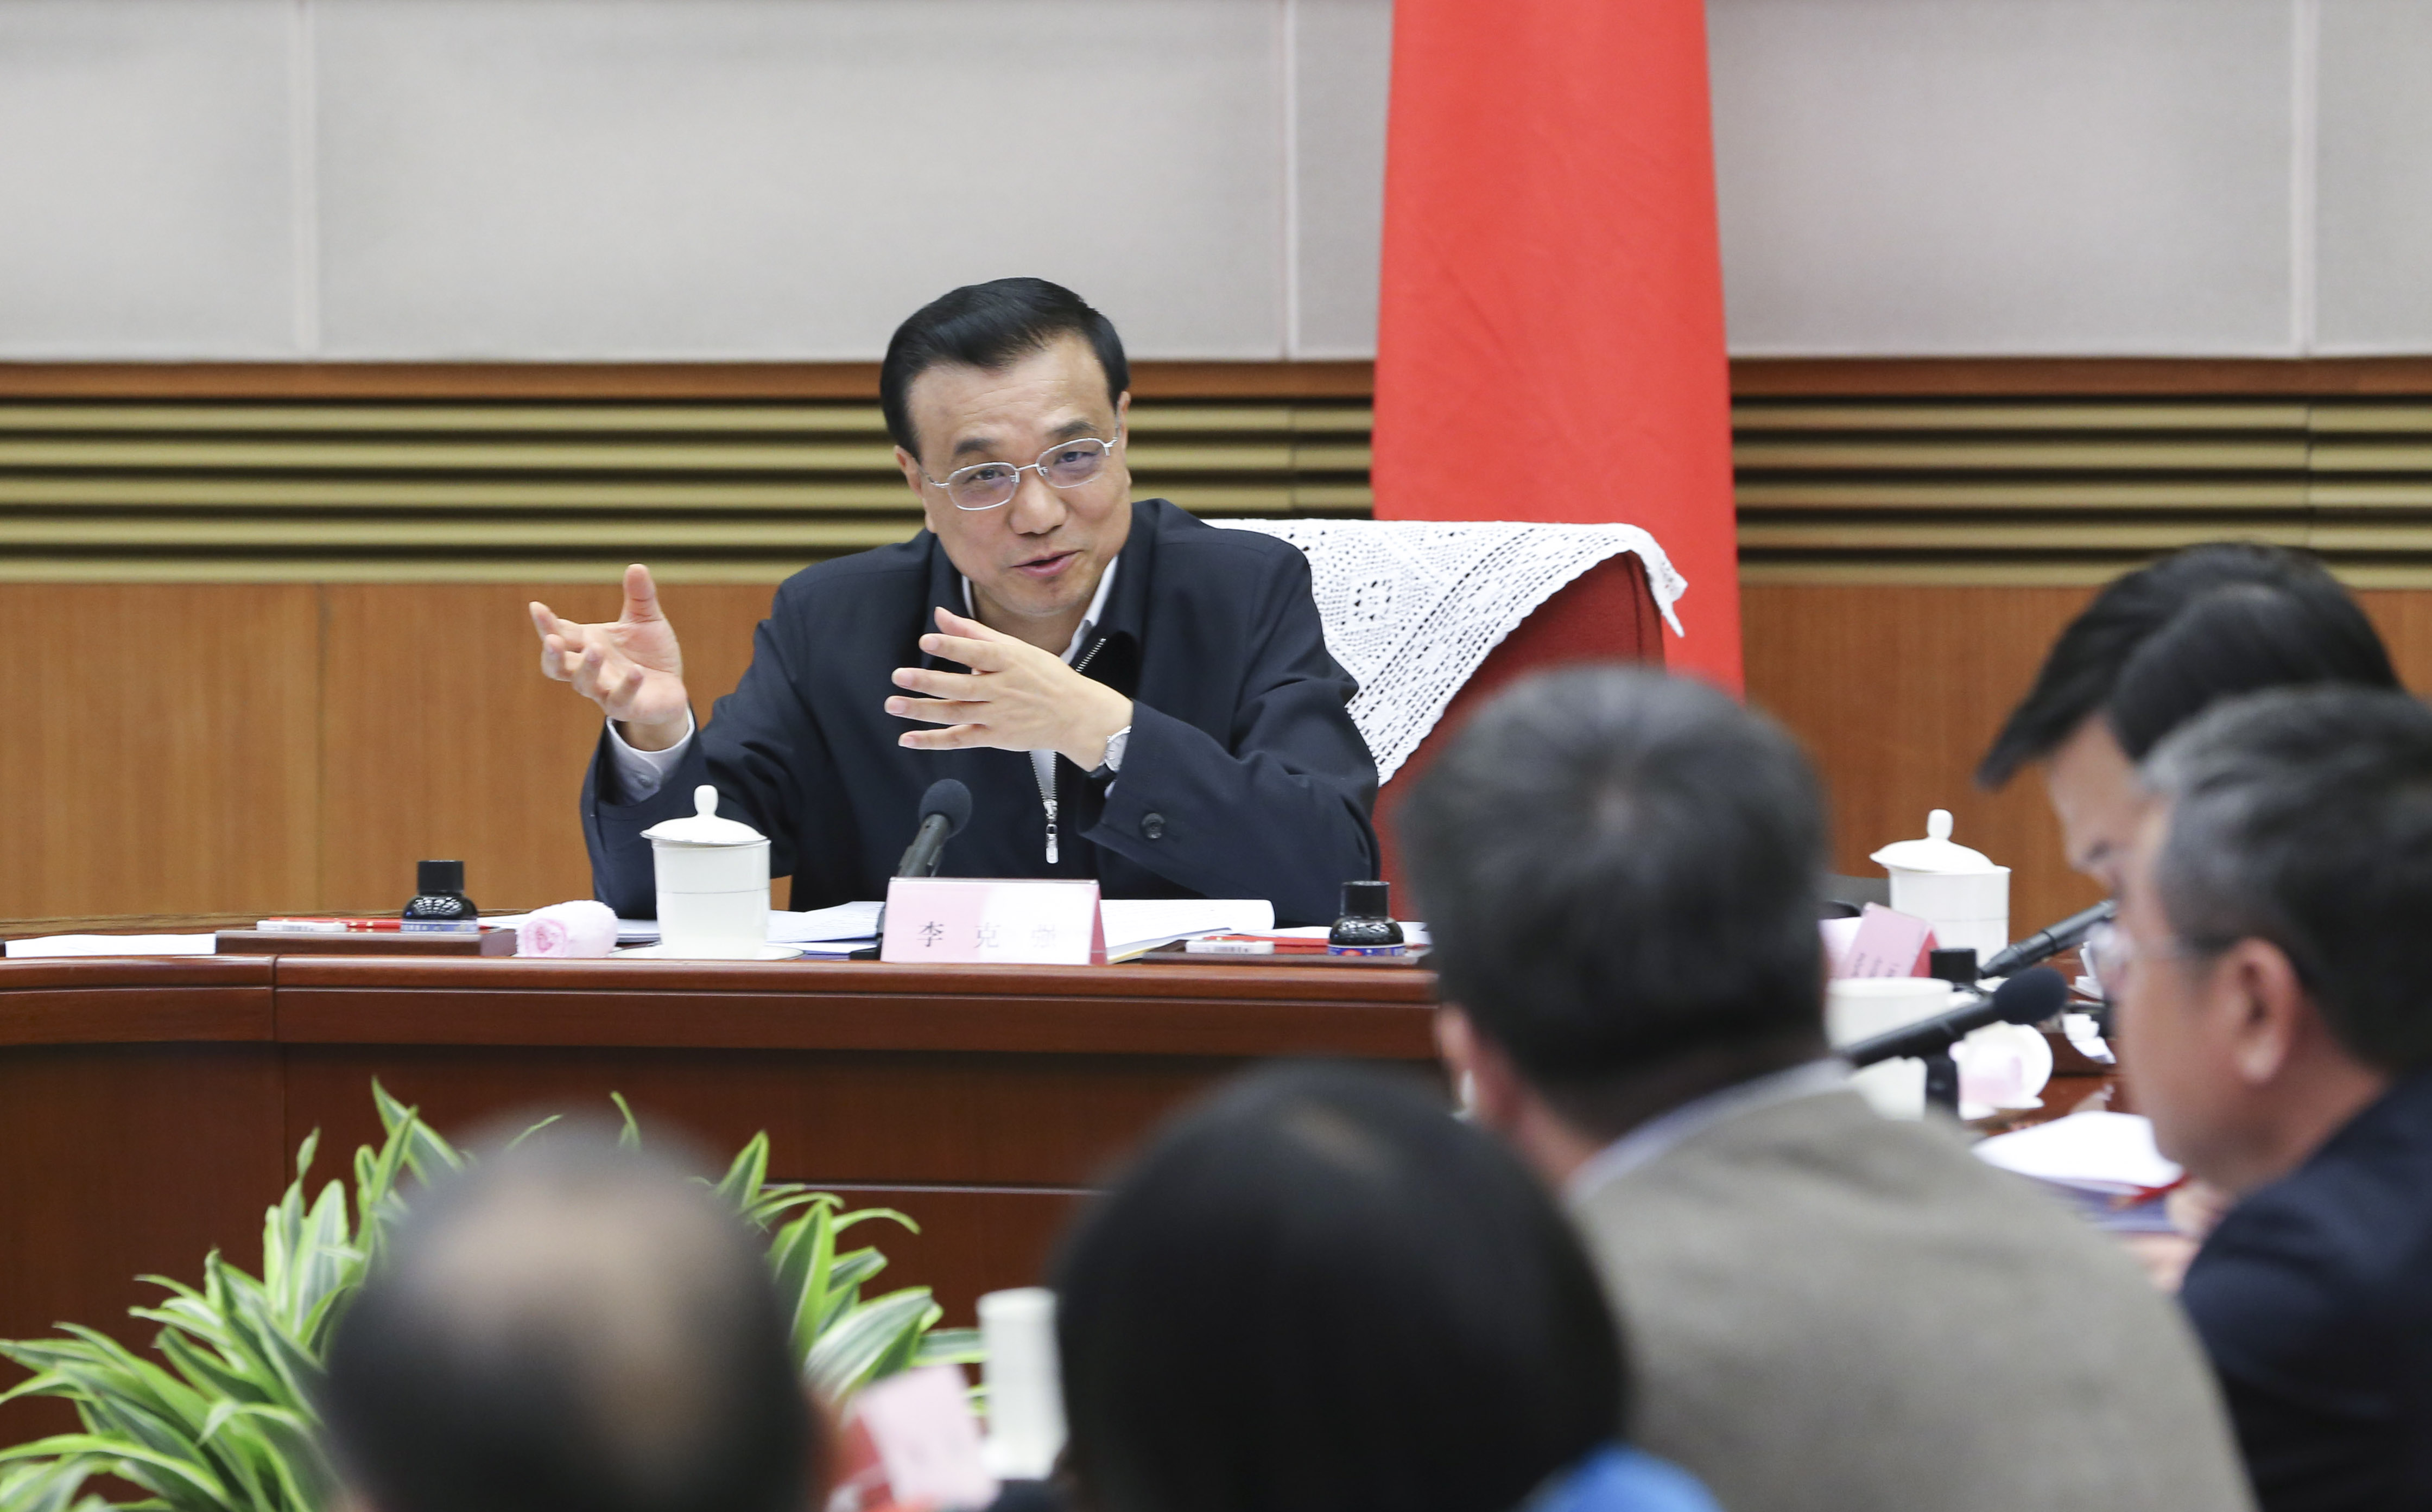 Chinese Premier Li Keqiang presides over a symposium on current economic situation in Beijing. Photo: Xinhua